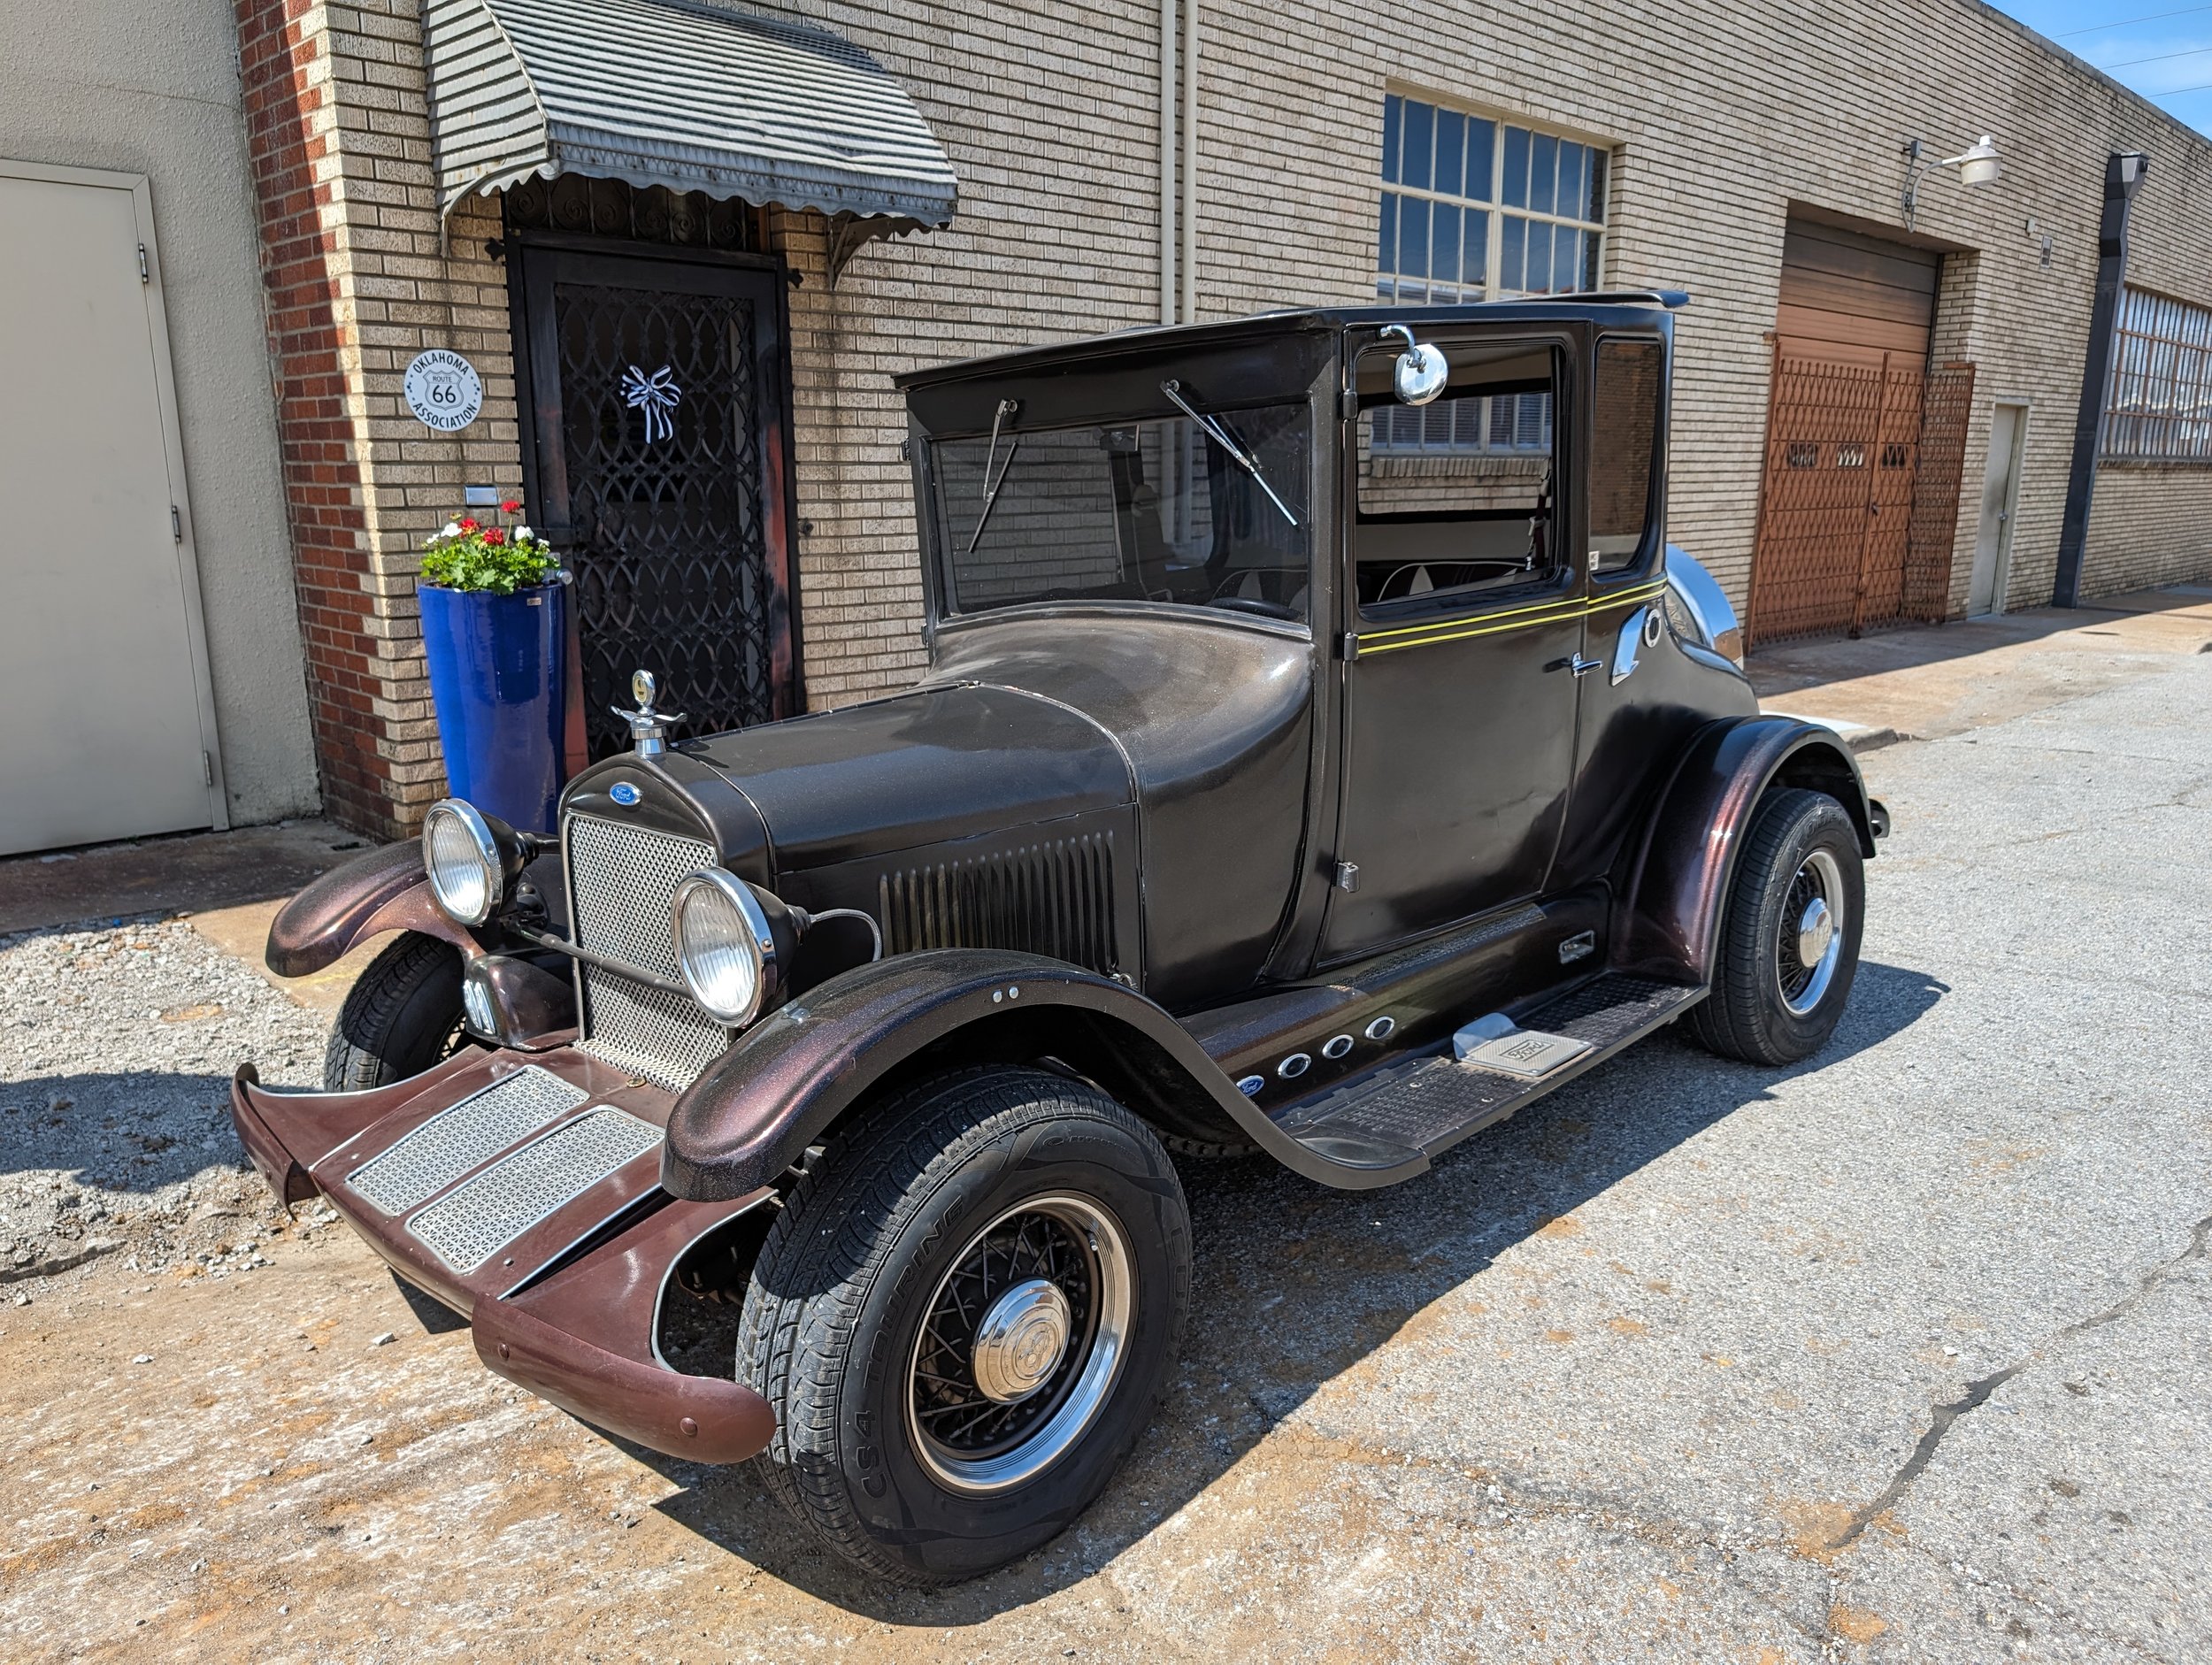 Timothy Griffin's 1926 Model T